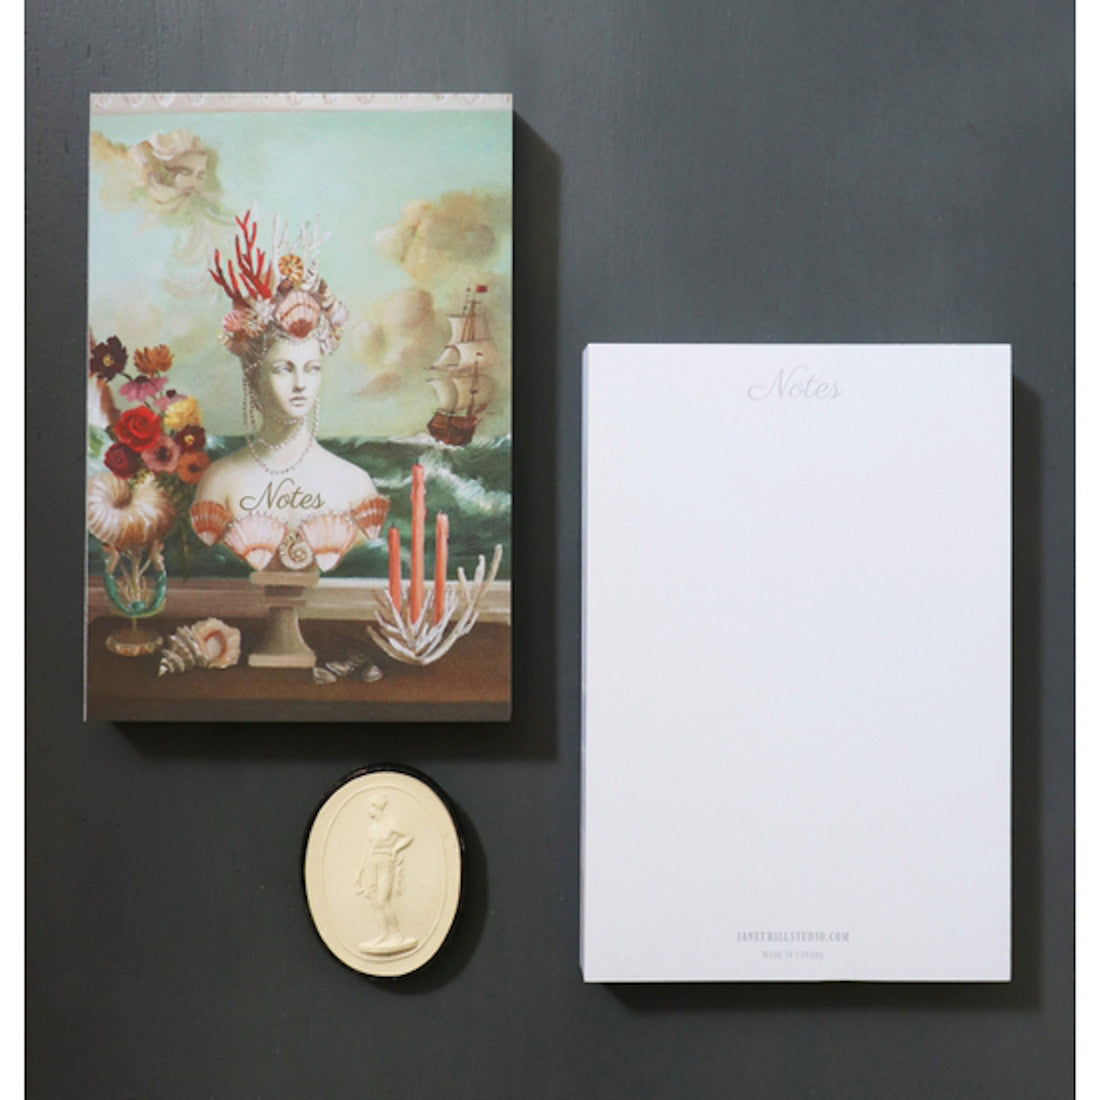 &quot;The Gods&quot; Tear-Away Notepad resting on a black table next to a single sheet flipped over to show the blank white back side labeled &quot;Notes&quot; across the top. The artwork is a painterly illustration of a white marble goddess bust wearing a crown of sea shells and coral, next to a bouquet and tapered candles in front of a painting of a ship at sea.